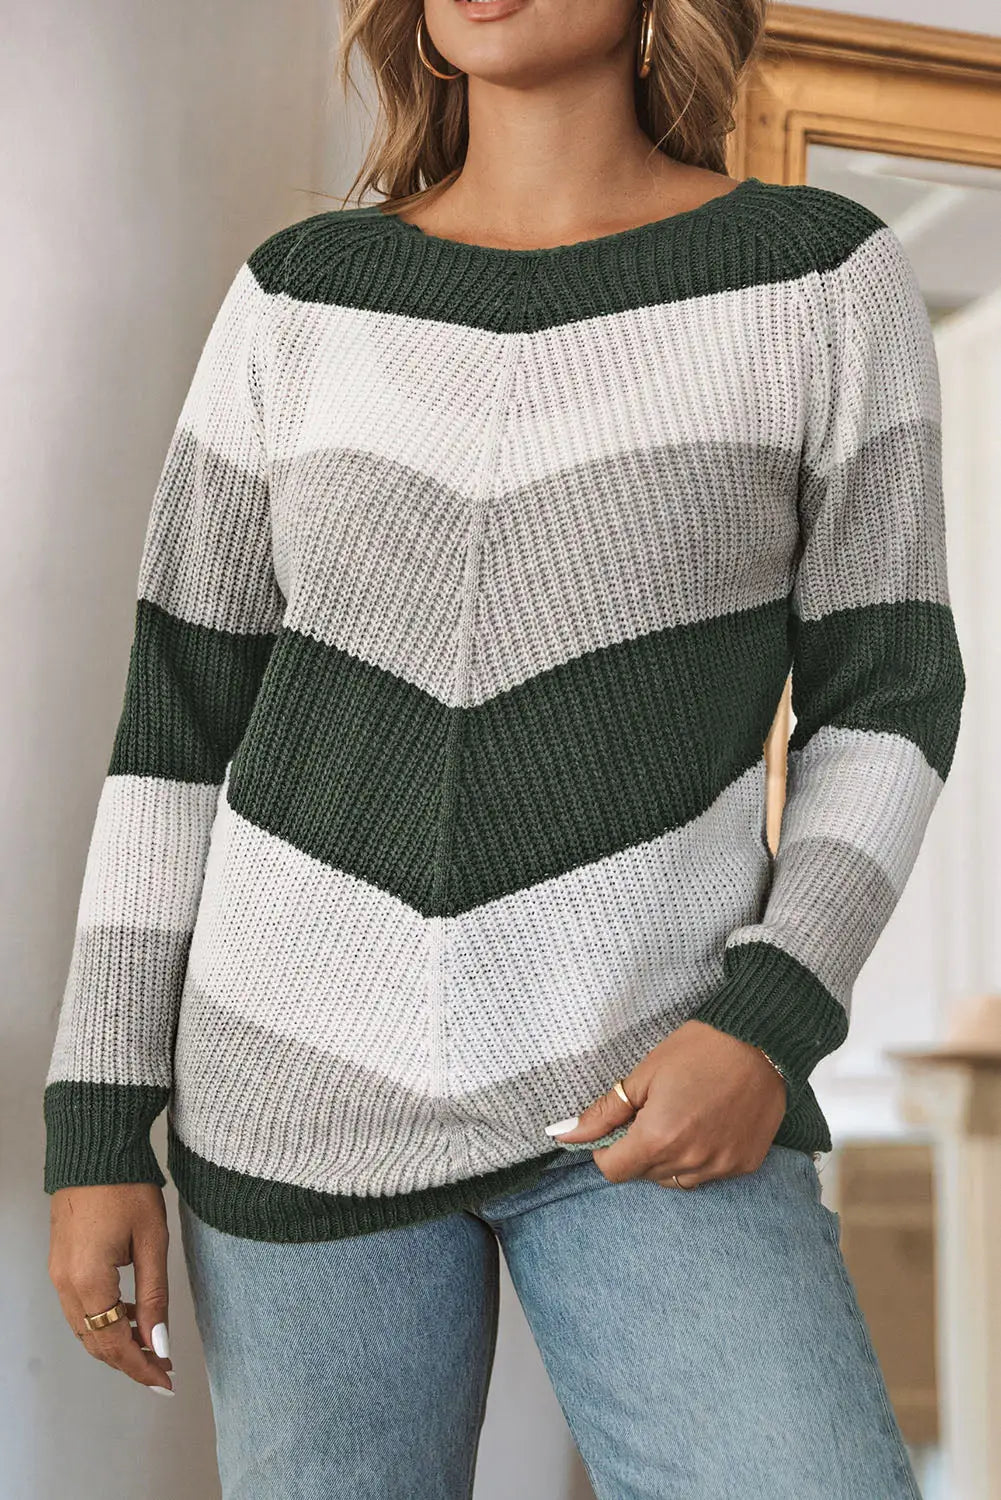 Green chevron color block striped knit pullover sweater - sweaters & cardigans